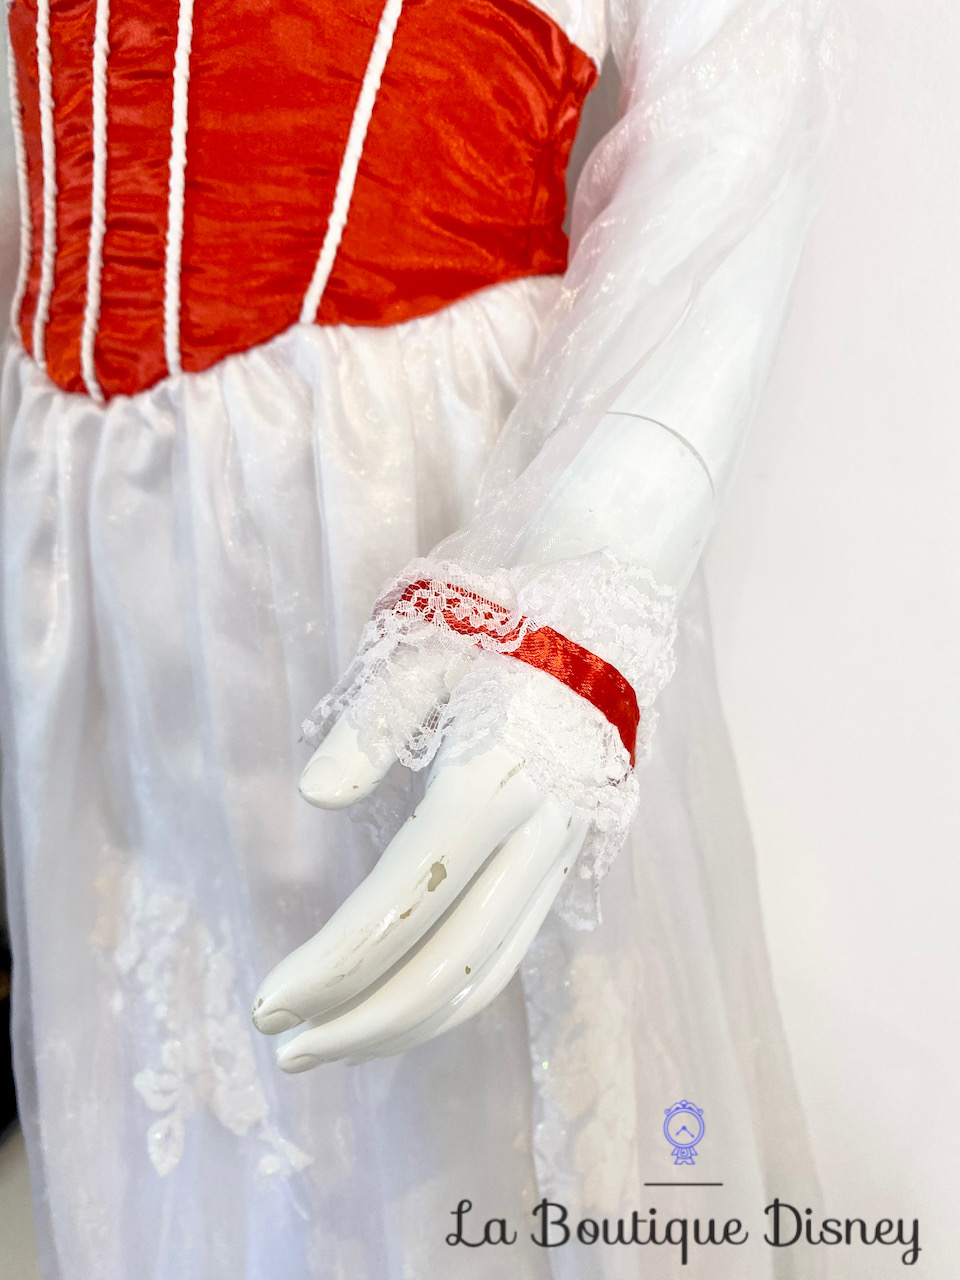 déguisement-mary-poppins-disneyland-disney-taille-12-ans-robe-blanche-dentelle-rouge-7